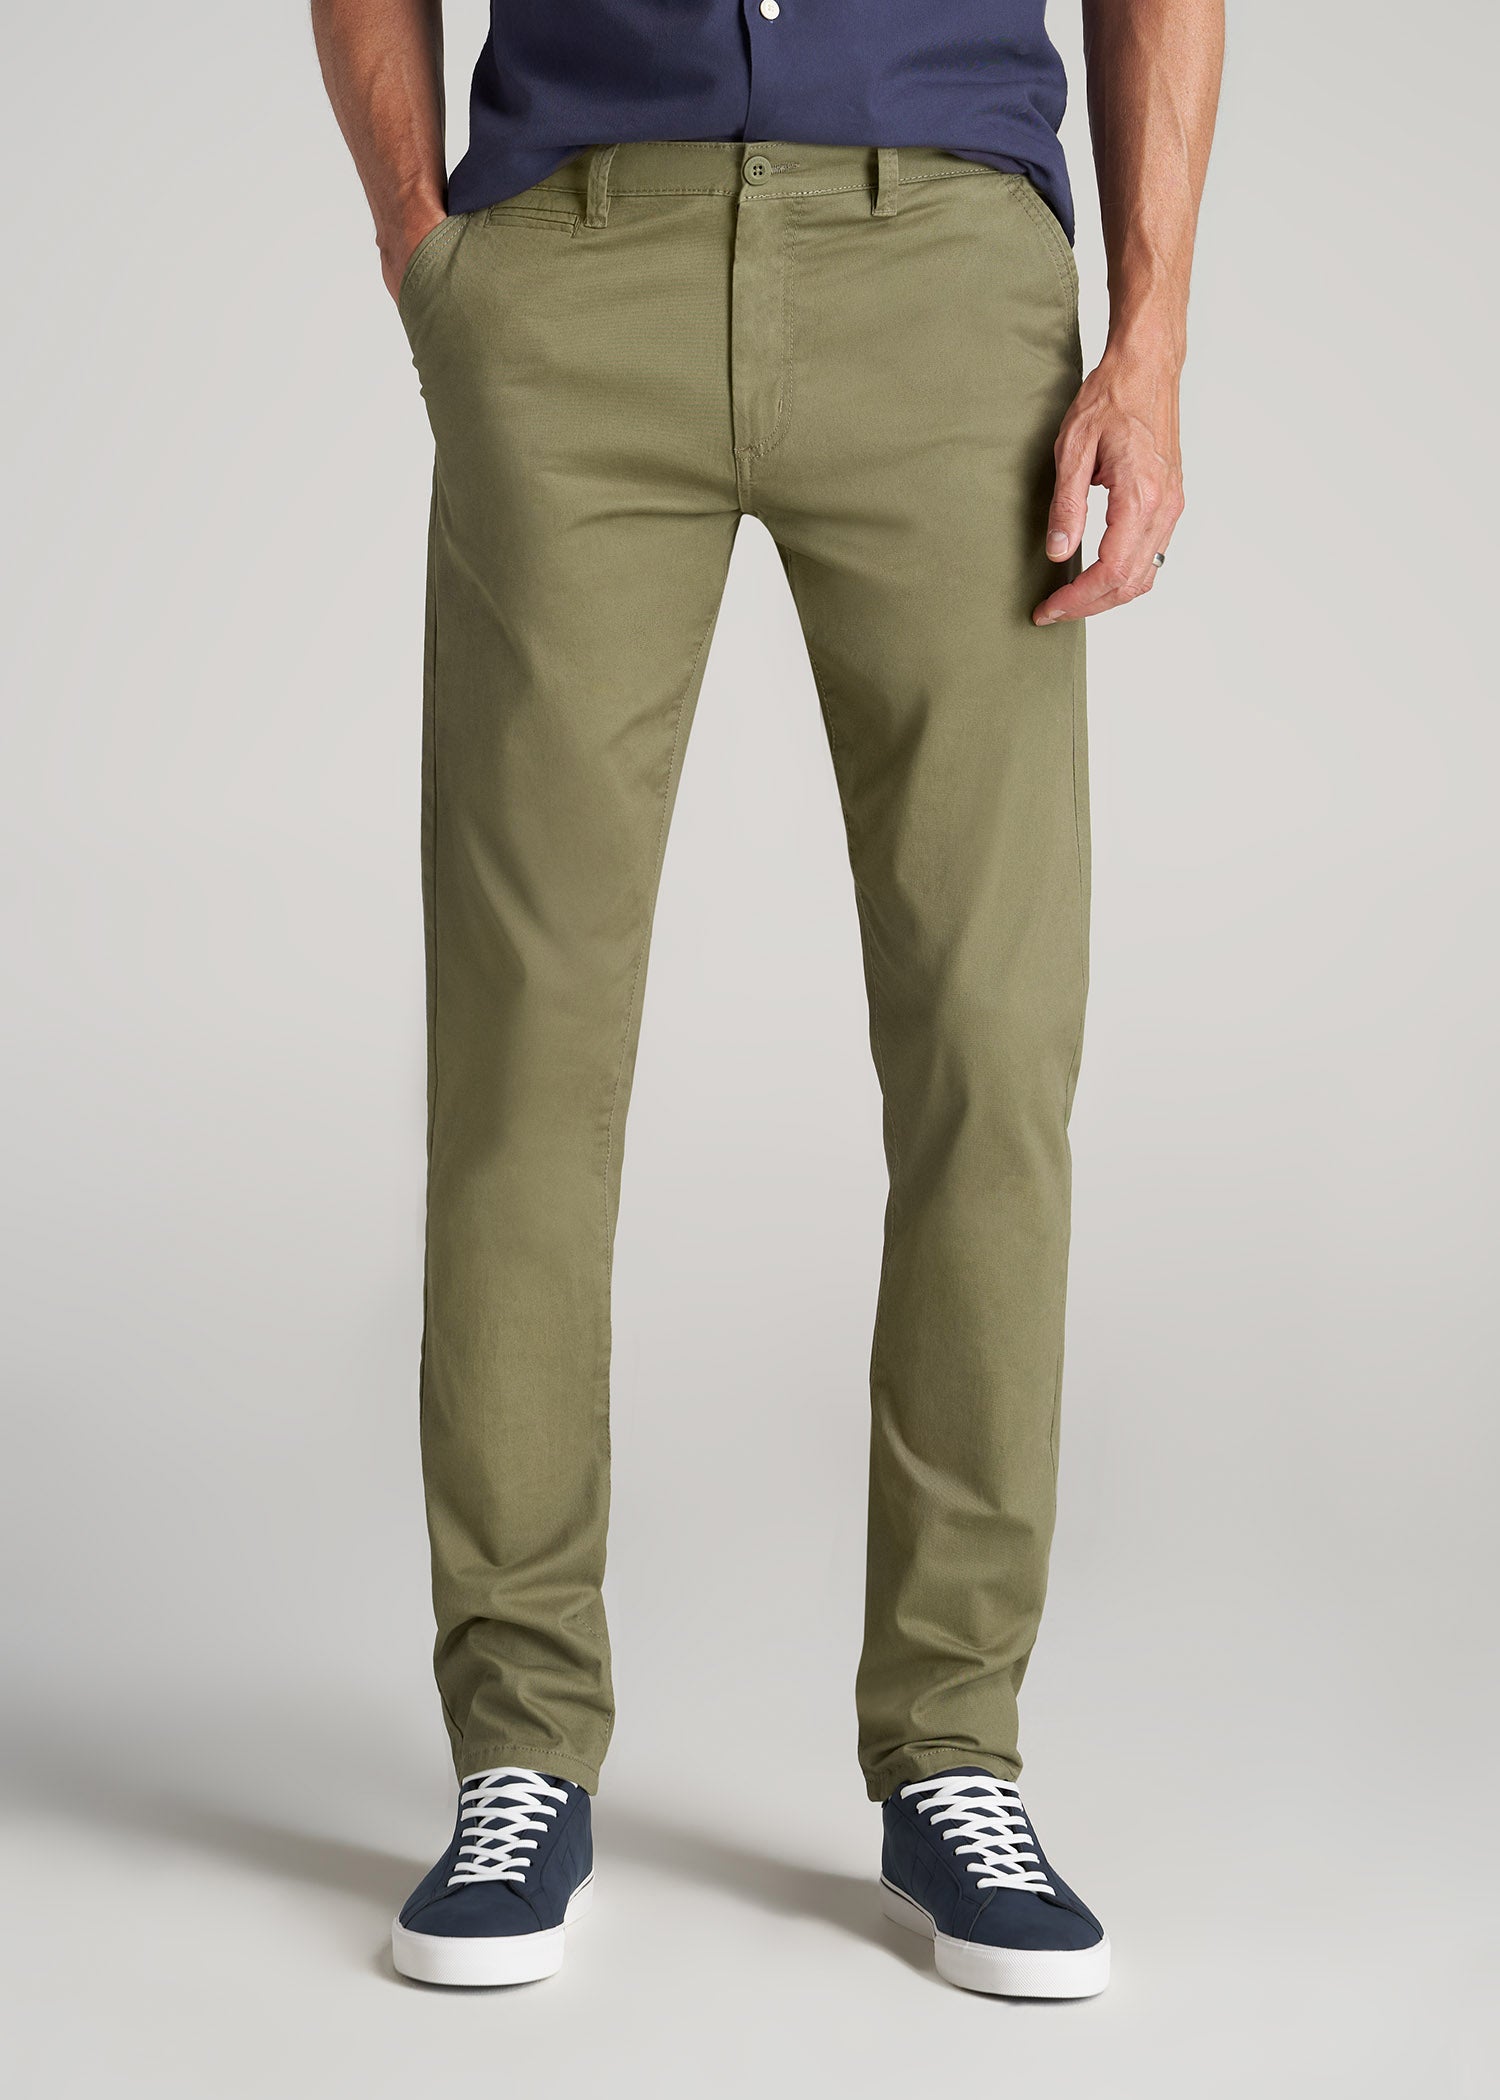 Tapered Chinos: Fatigue Green Men's Tall Tapered Fit Chino Pant